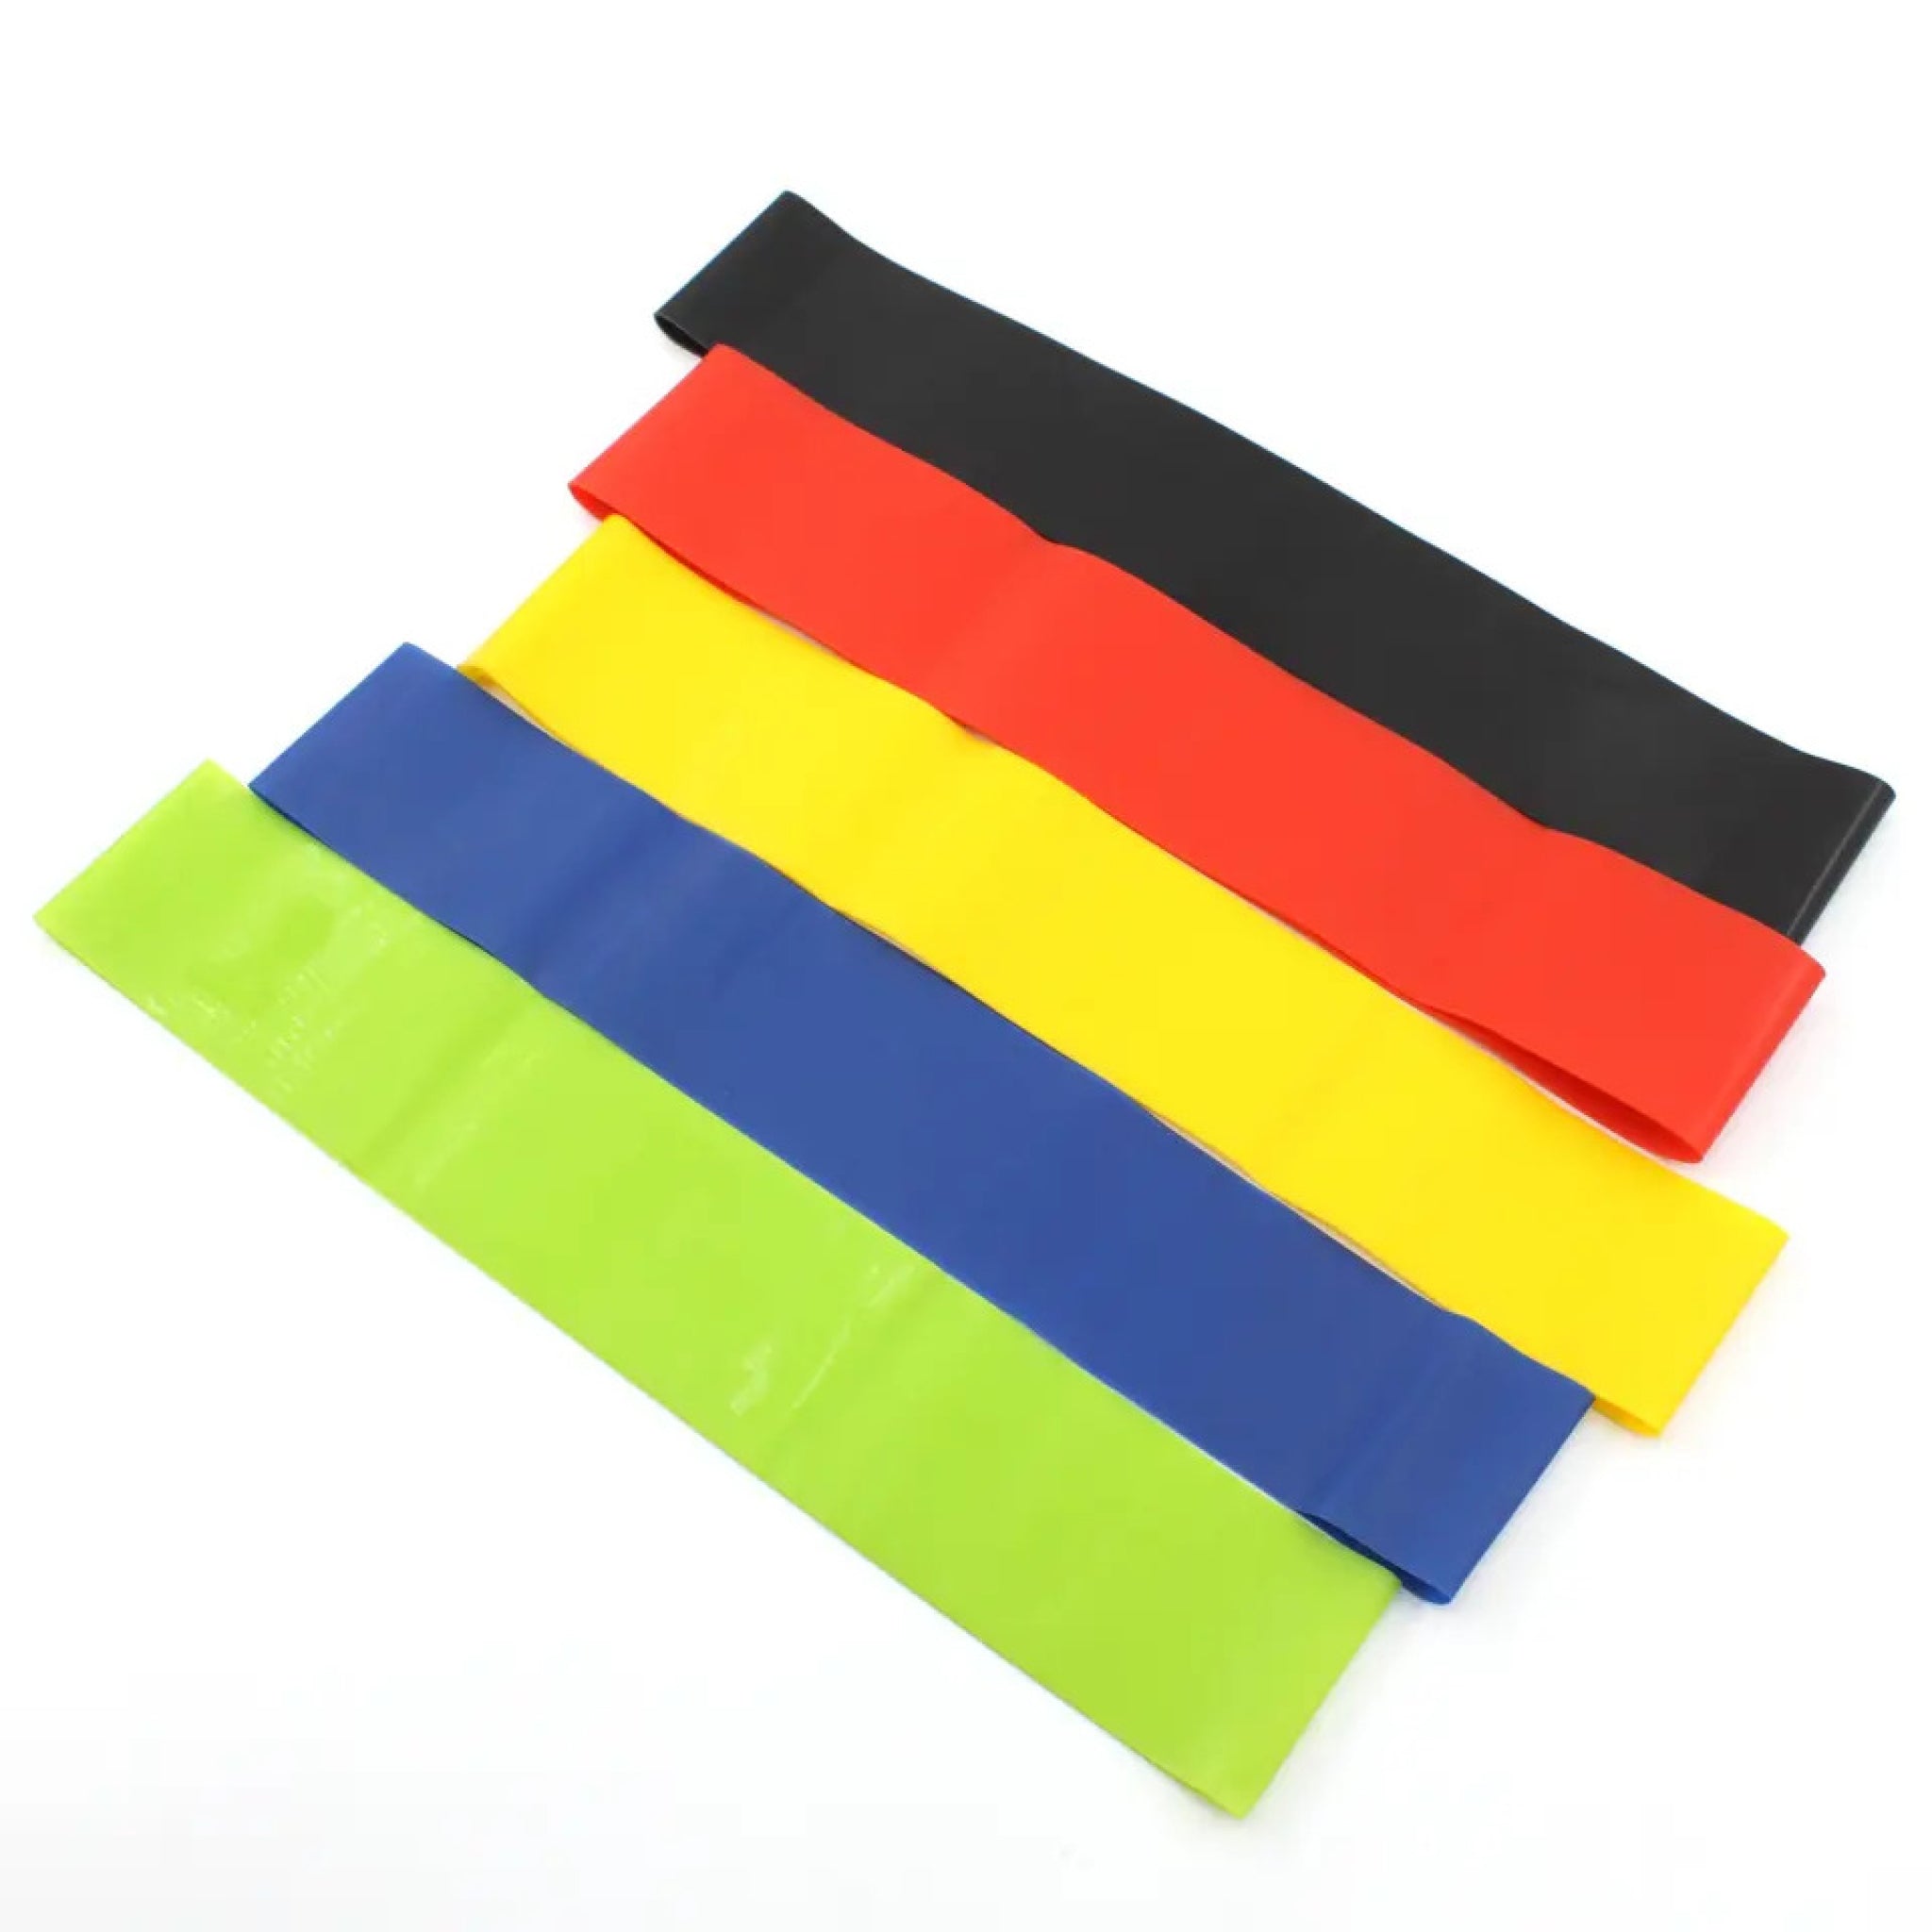 Multi-Colored Resistance Bands Lined Up at Express Gym Supply